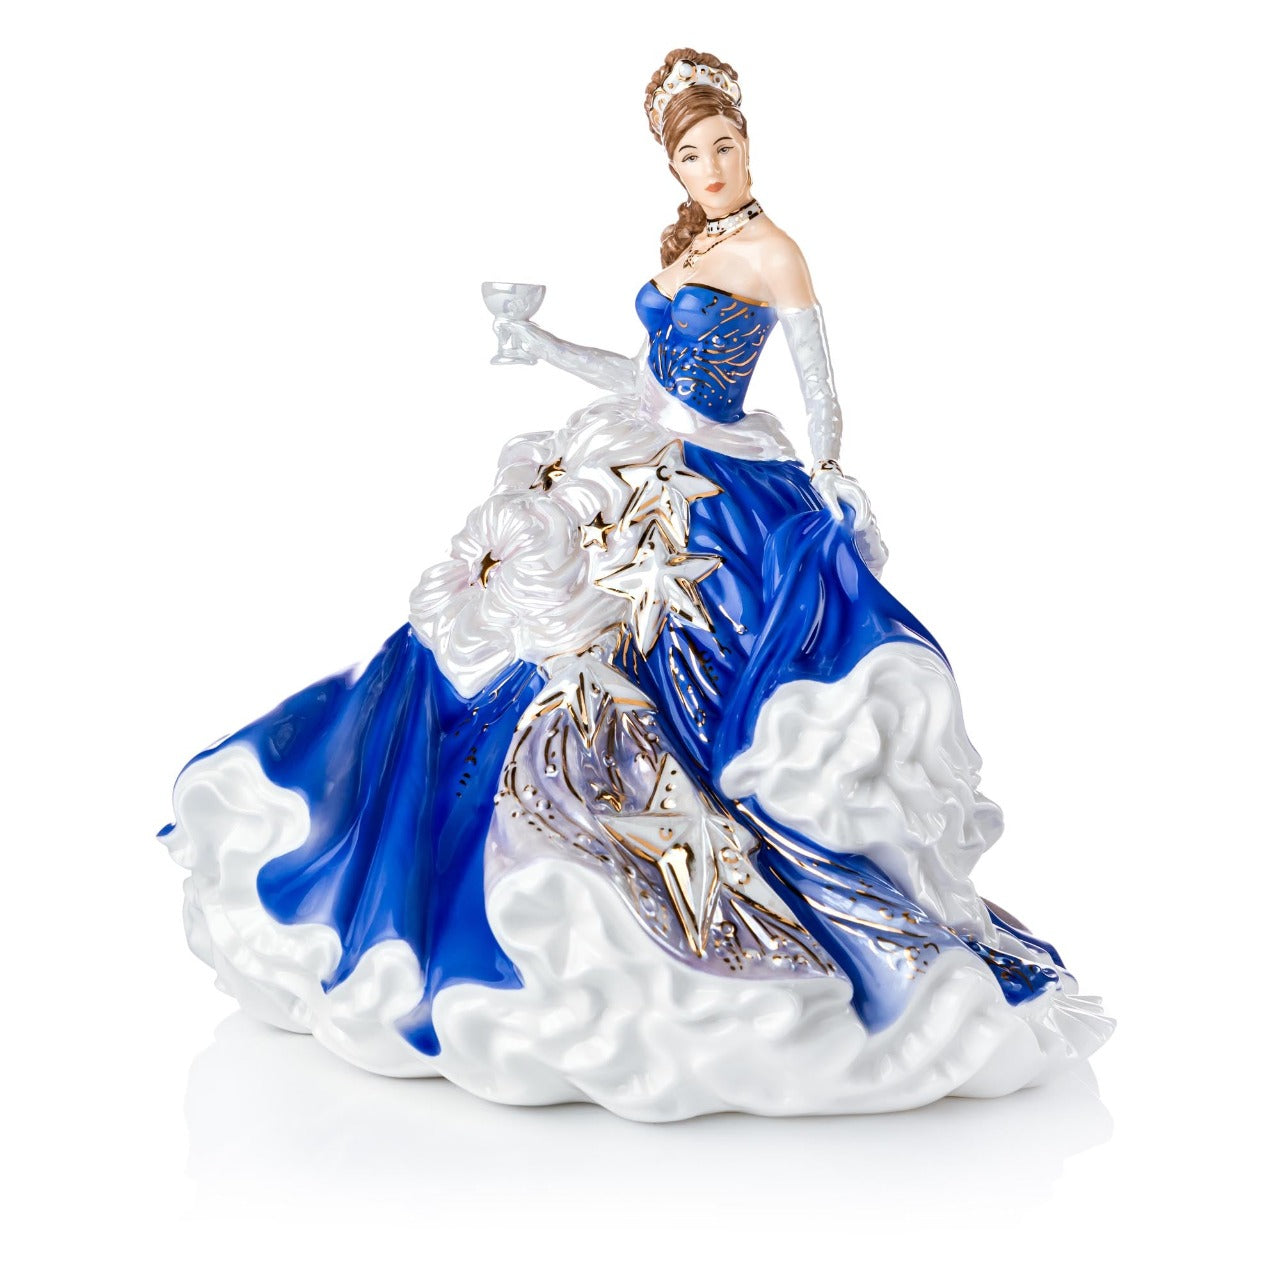 English Ladies Congratulations Sapphire  English Ladies Company have added another figurine to our ever-growing Congratulations range in our English Ladies collection. This time it’s Congratulations Sapphire. With this range being one of our best sellers we knew we had to bring you another colourway.